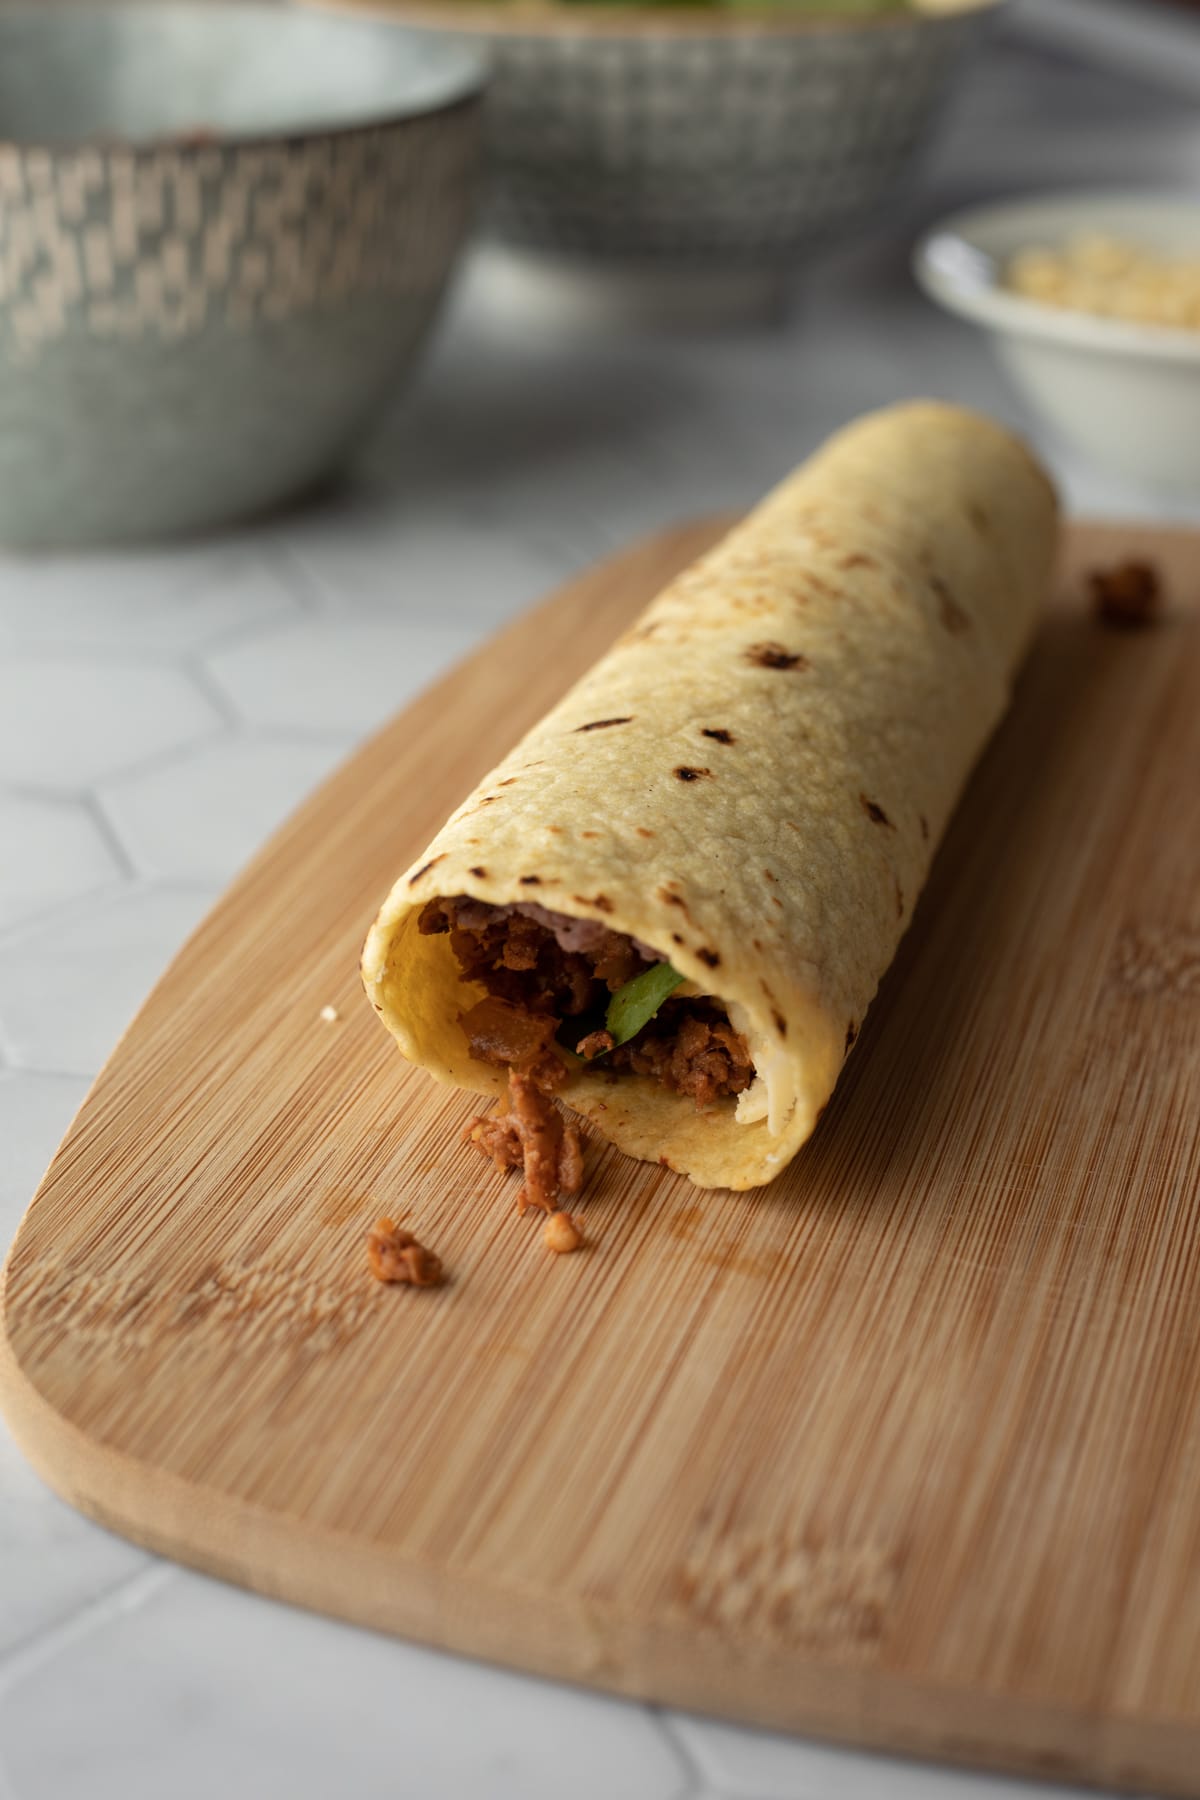 side view of tortilla stuffed, rolled up and ready to be baked.